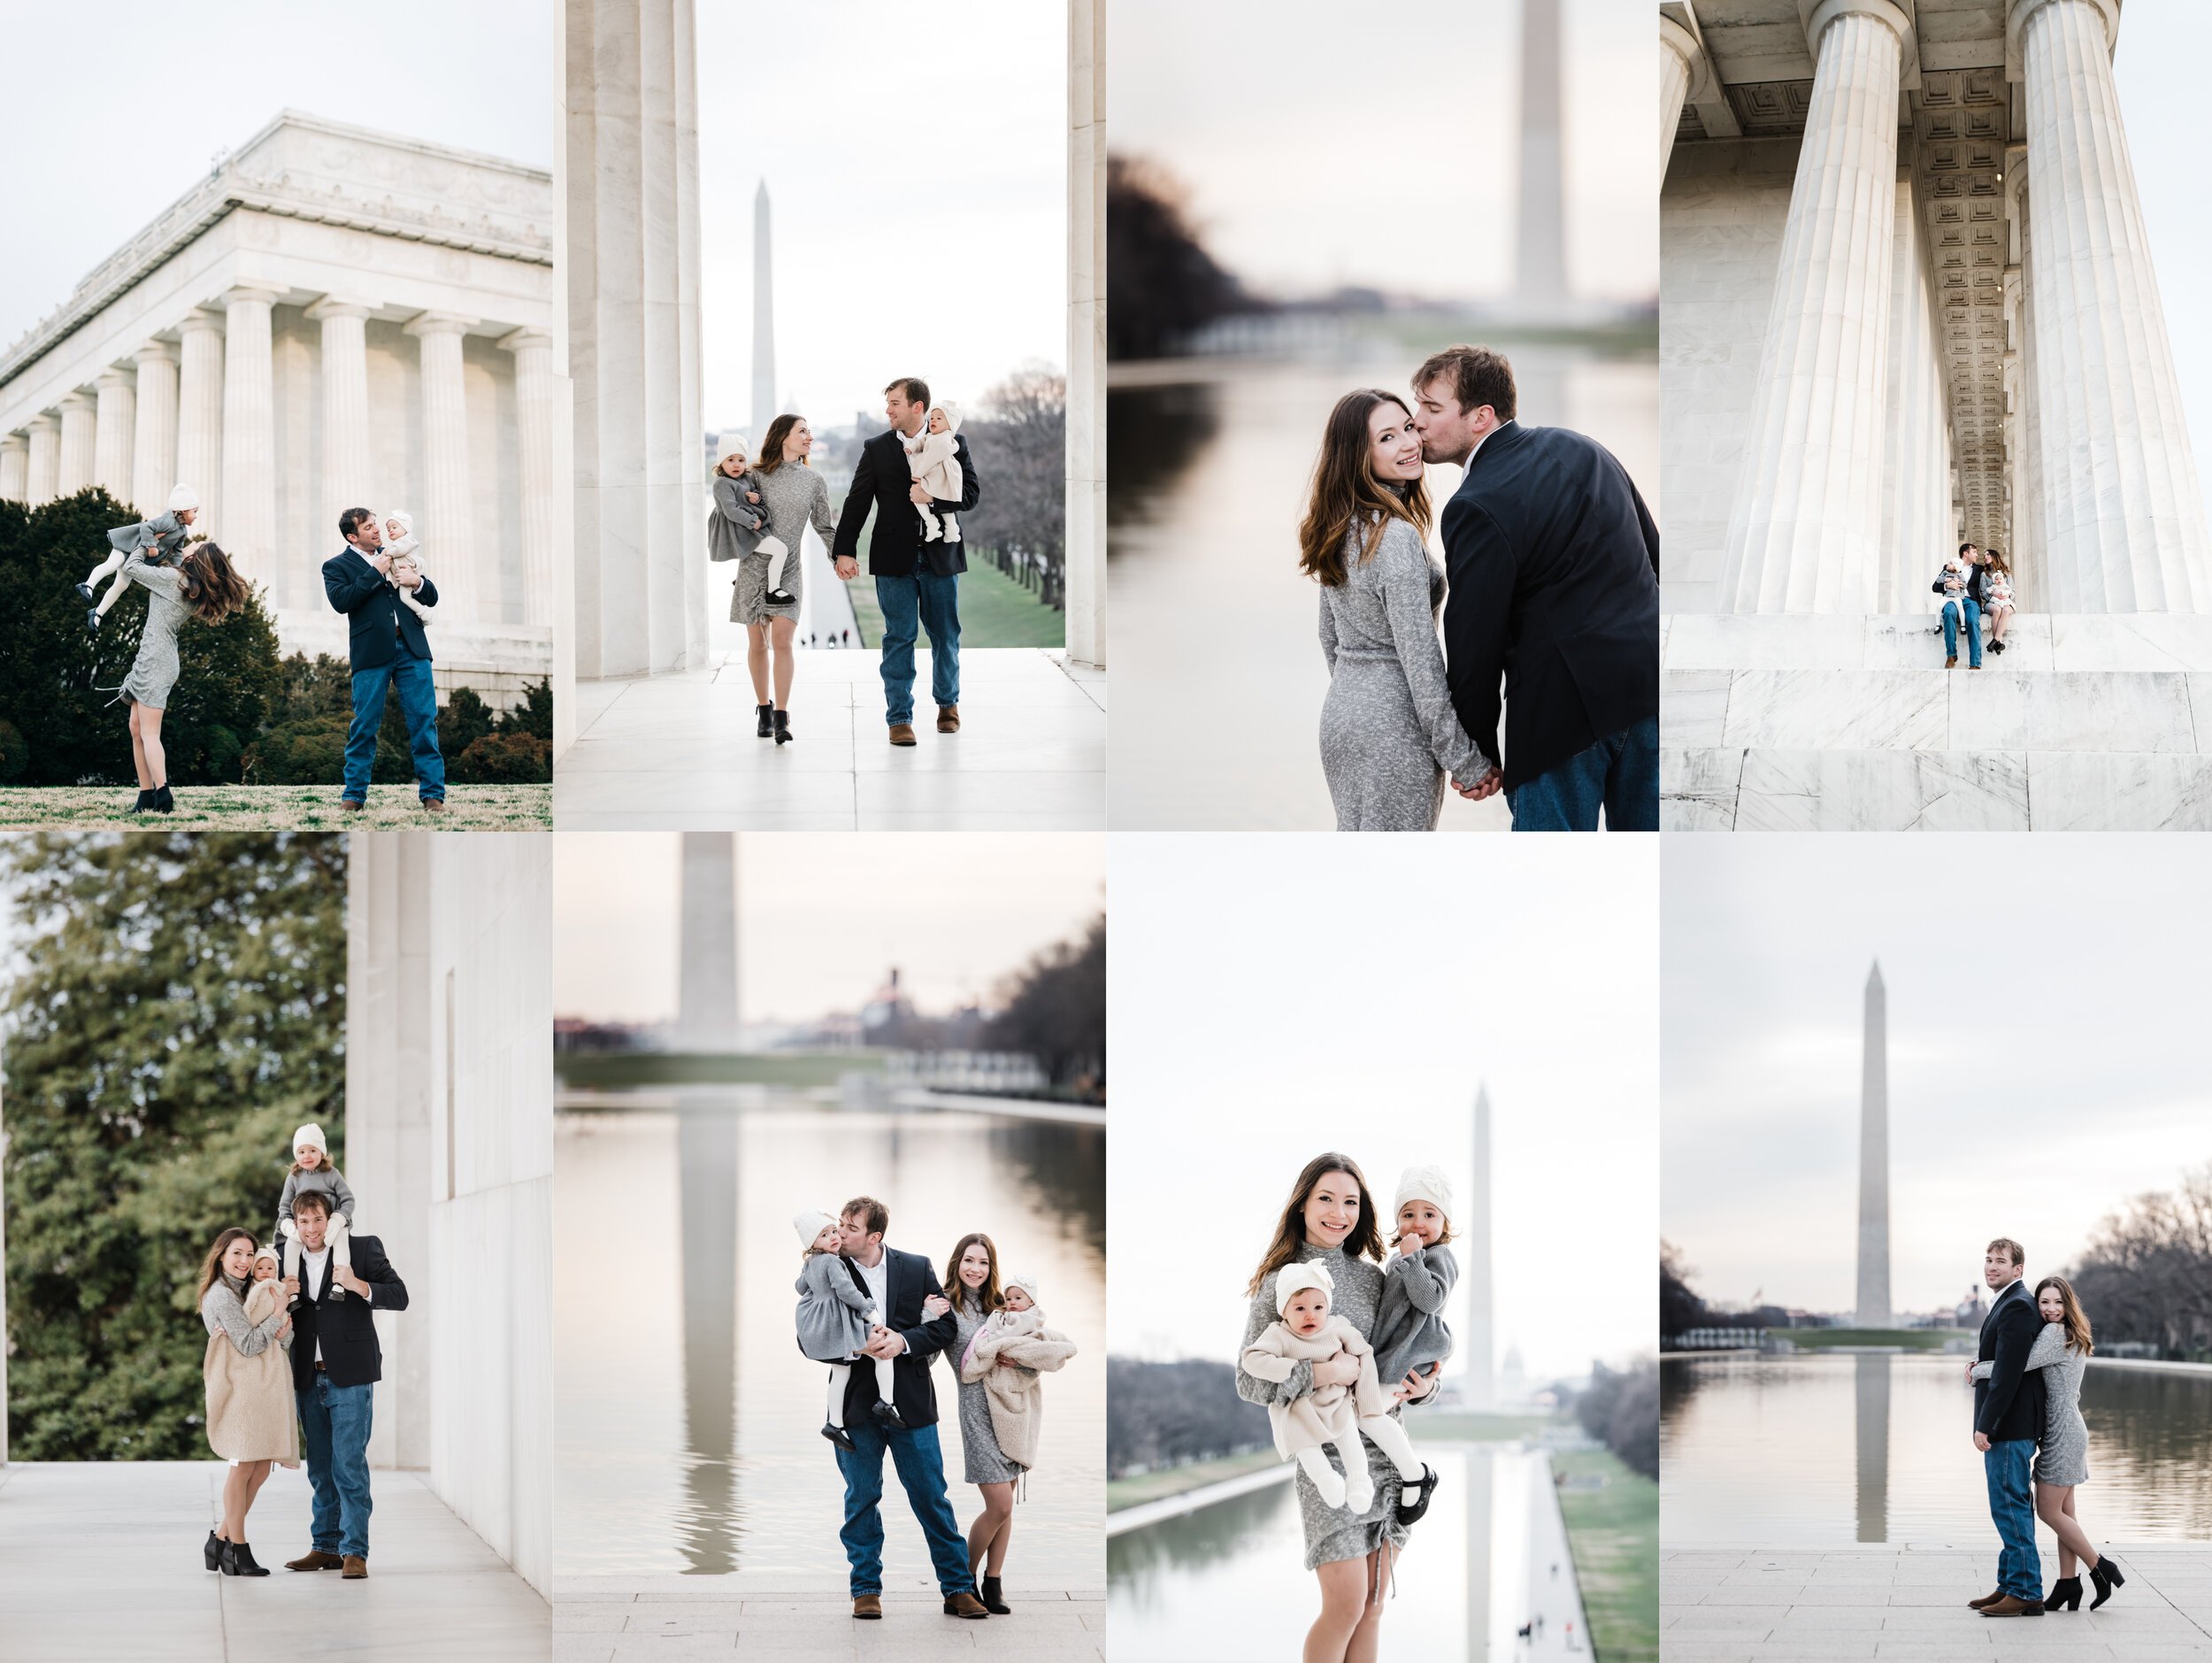 Family photoshoot at the National Mall